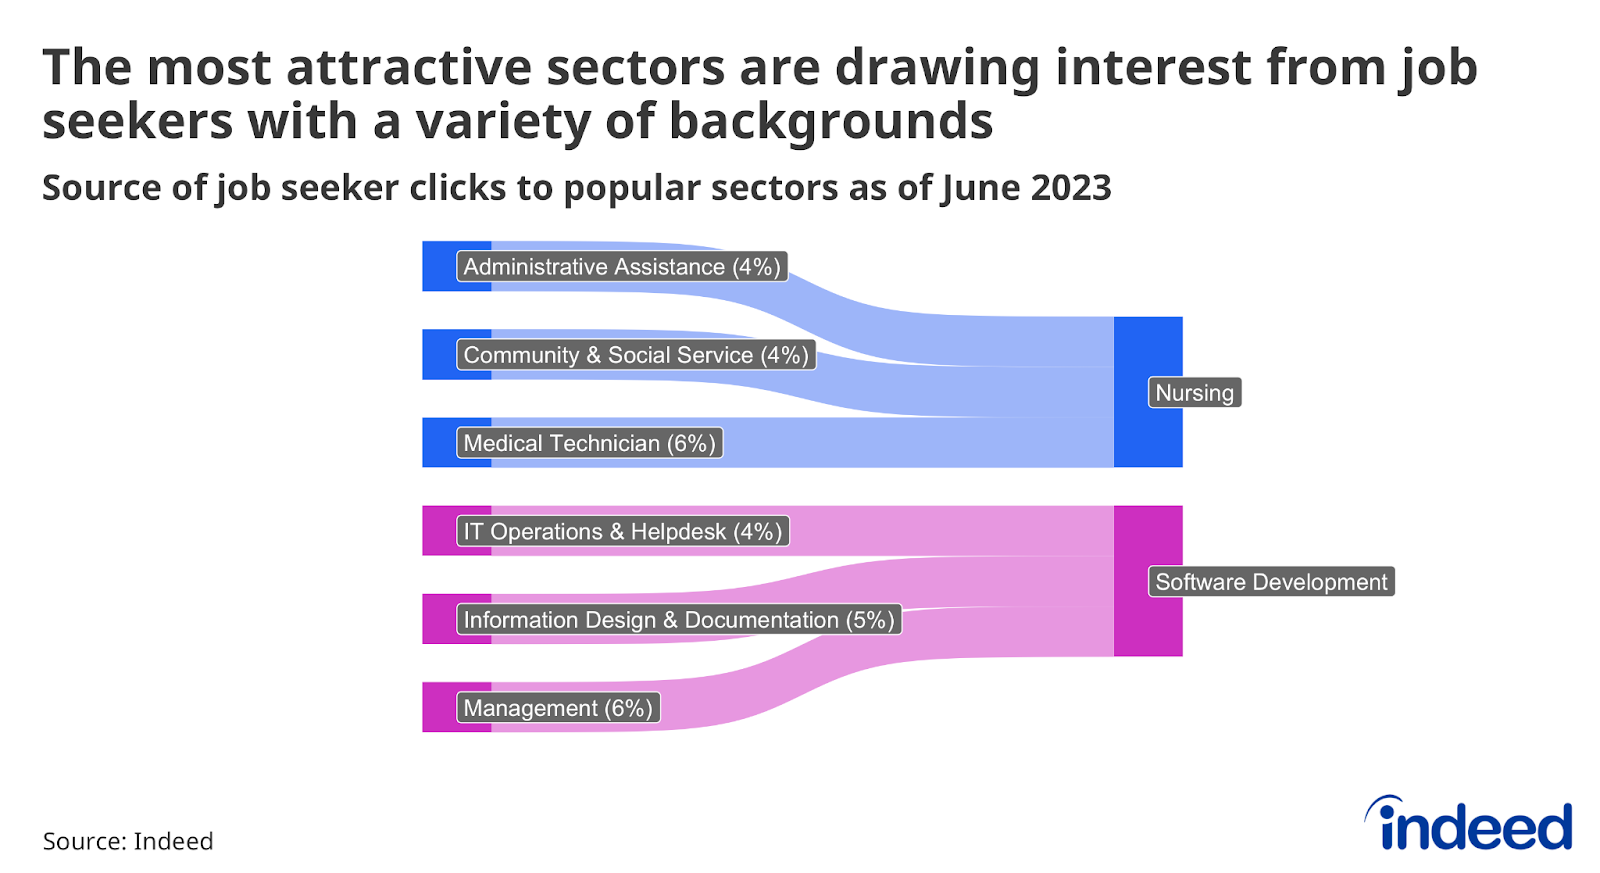 A diagram titled “The most attractive sectors are drawing interest from job seekers with a variety of backgrounds” shows the three most common sources of inbound job posting traffic to the nursing and software development sectors. As of June 2023, nursing jobs attracted the most interest from medical technicians, community & social service workers, and administrative assistants. 